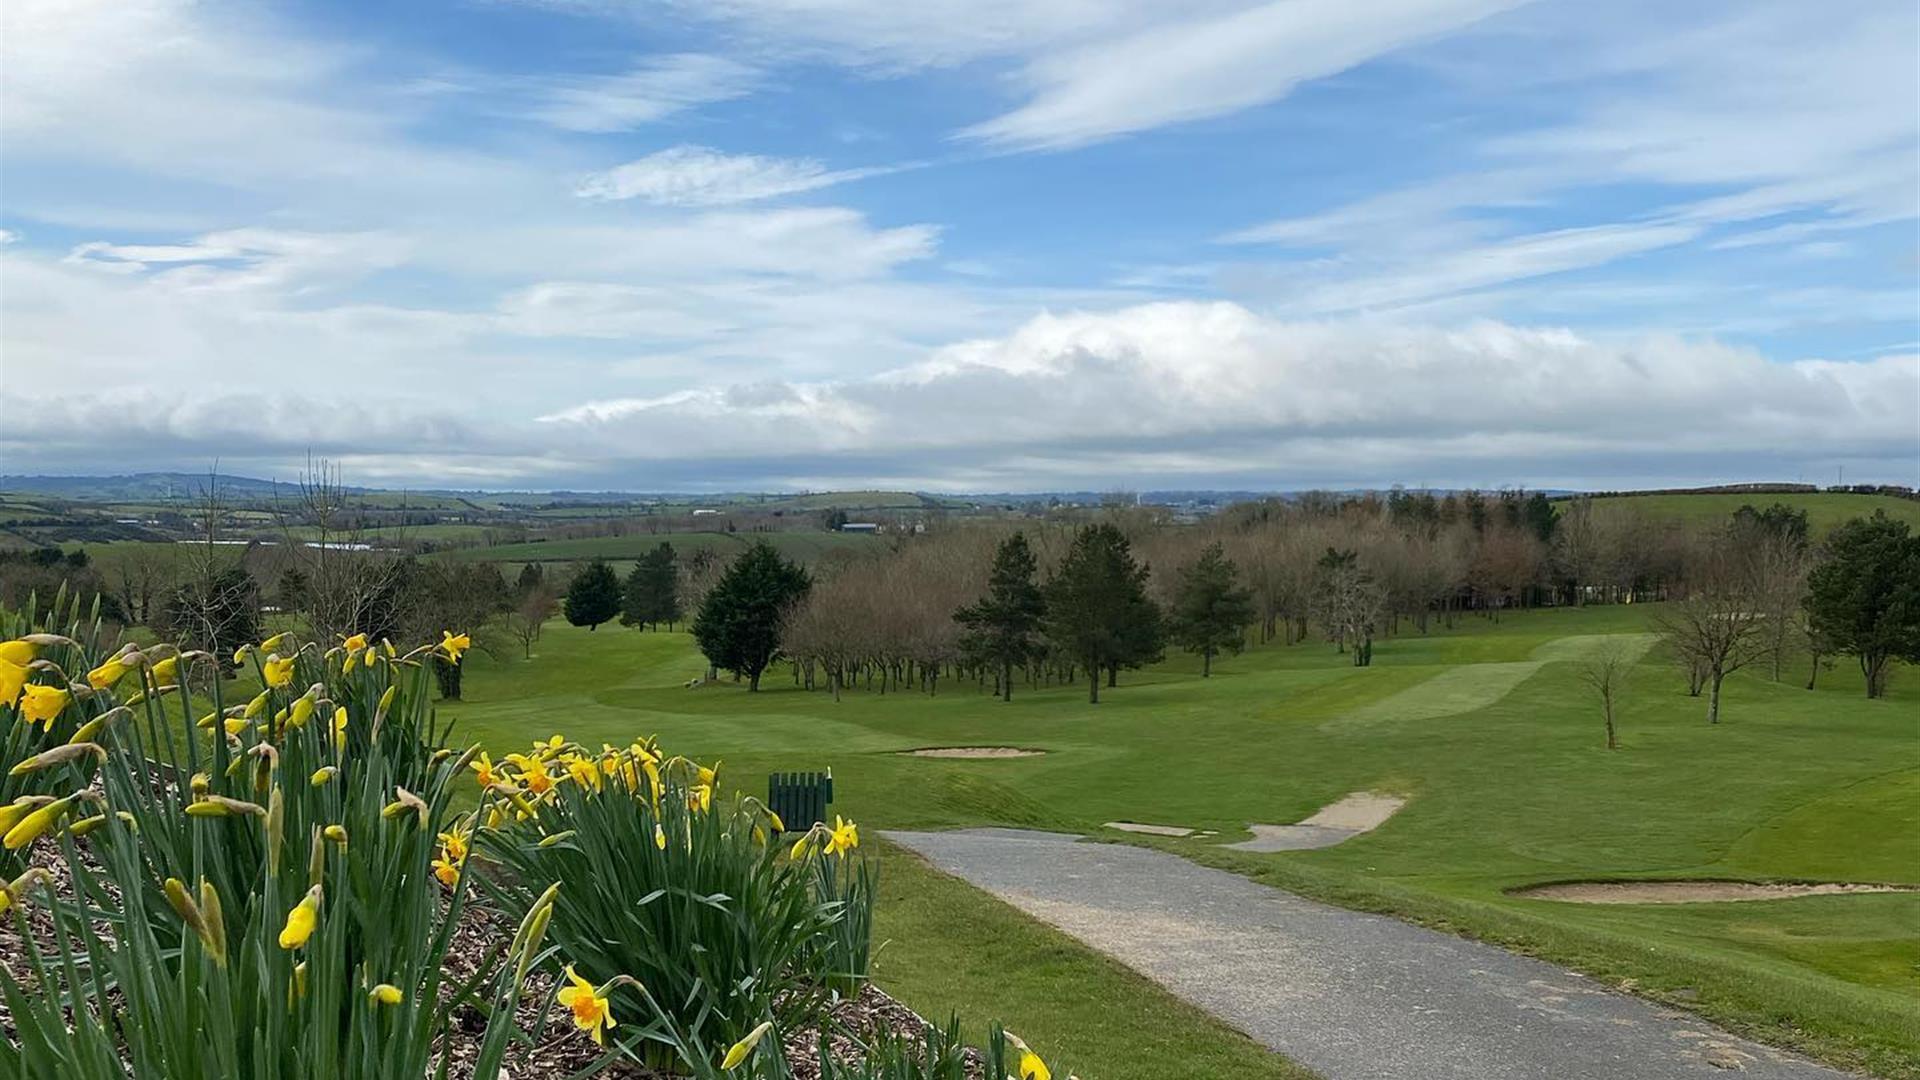 Image shows golf course, walking path and view of countryside beyond